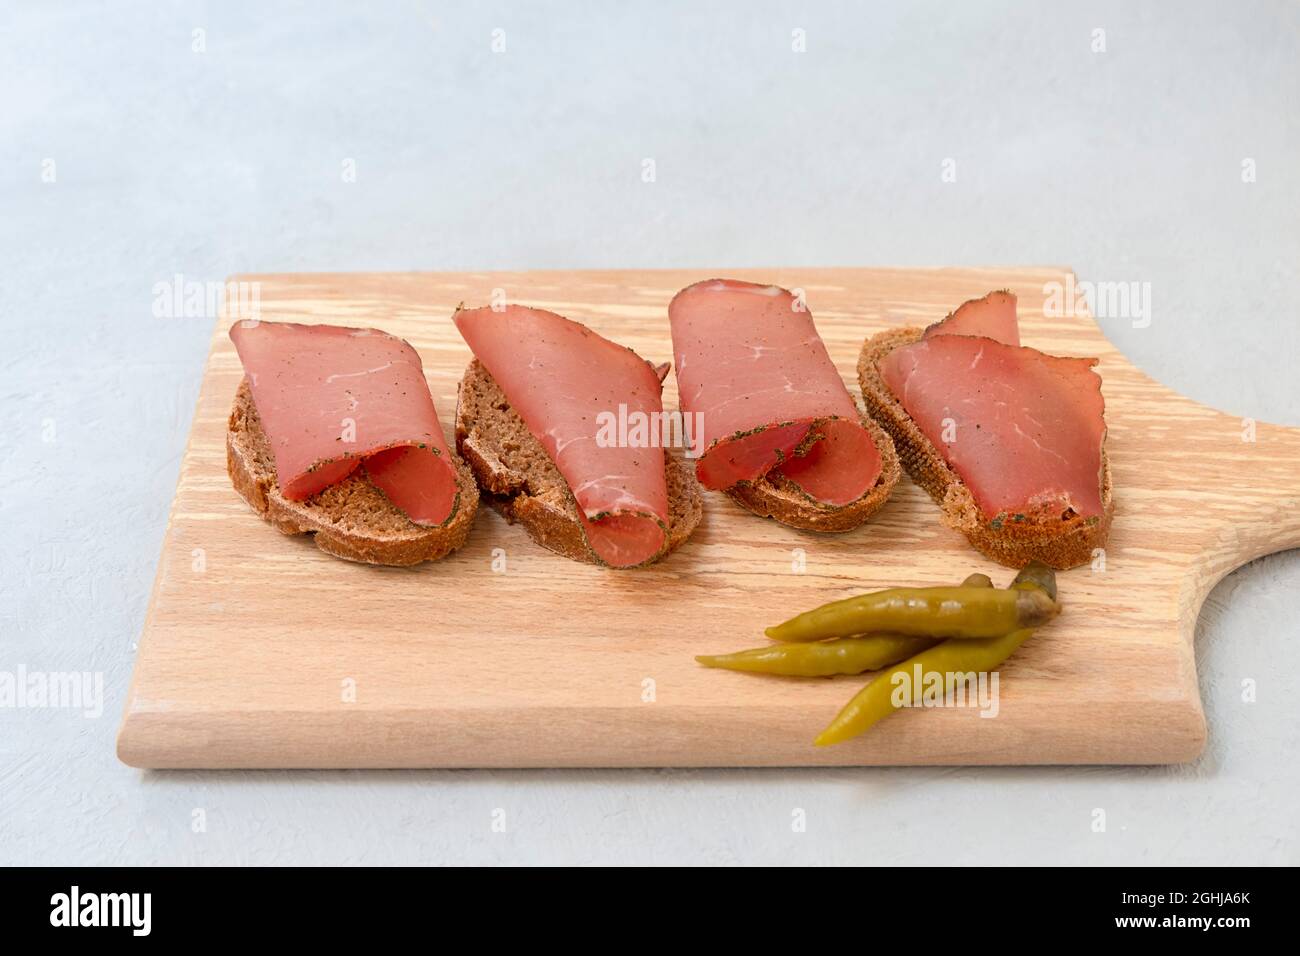 Sandwich with sliced dried meat served on cutting board on neutral grey background Stock Photo